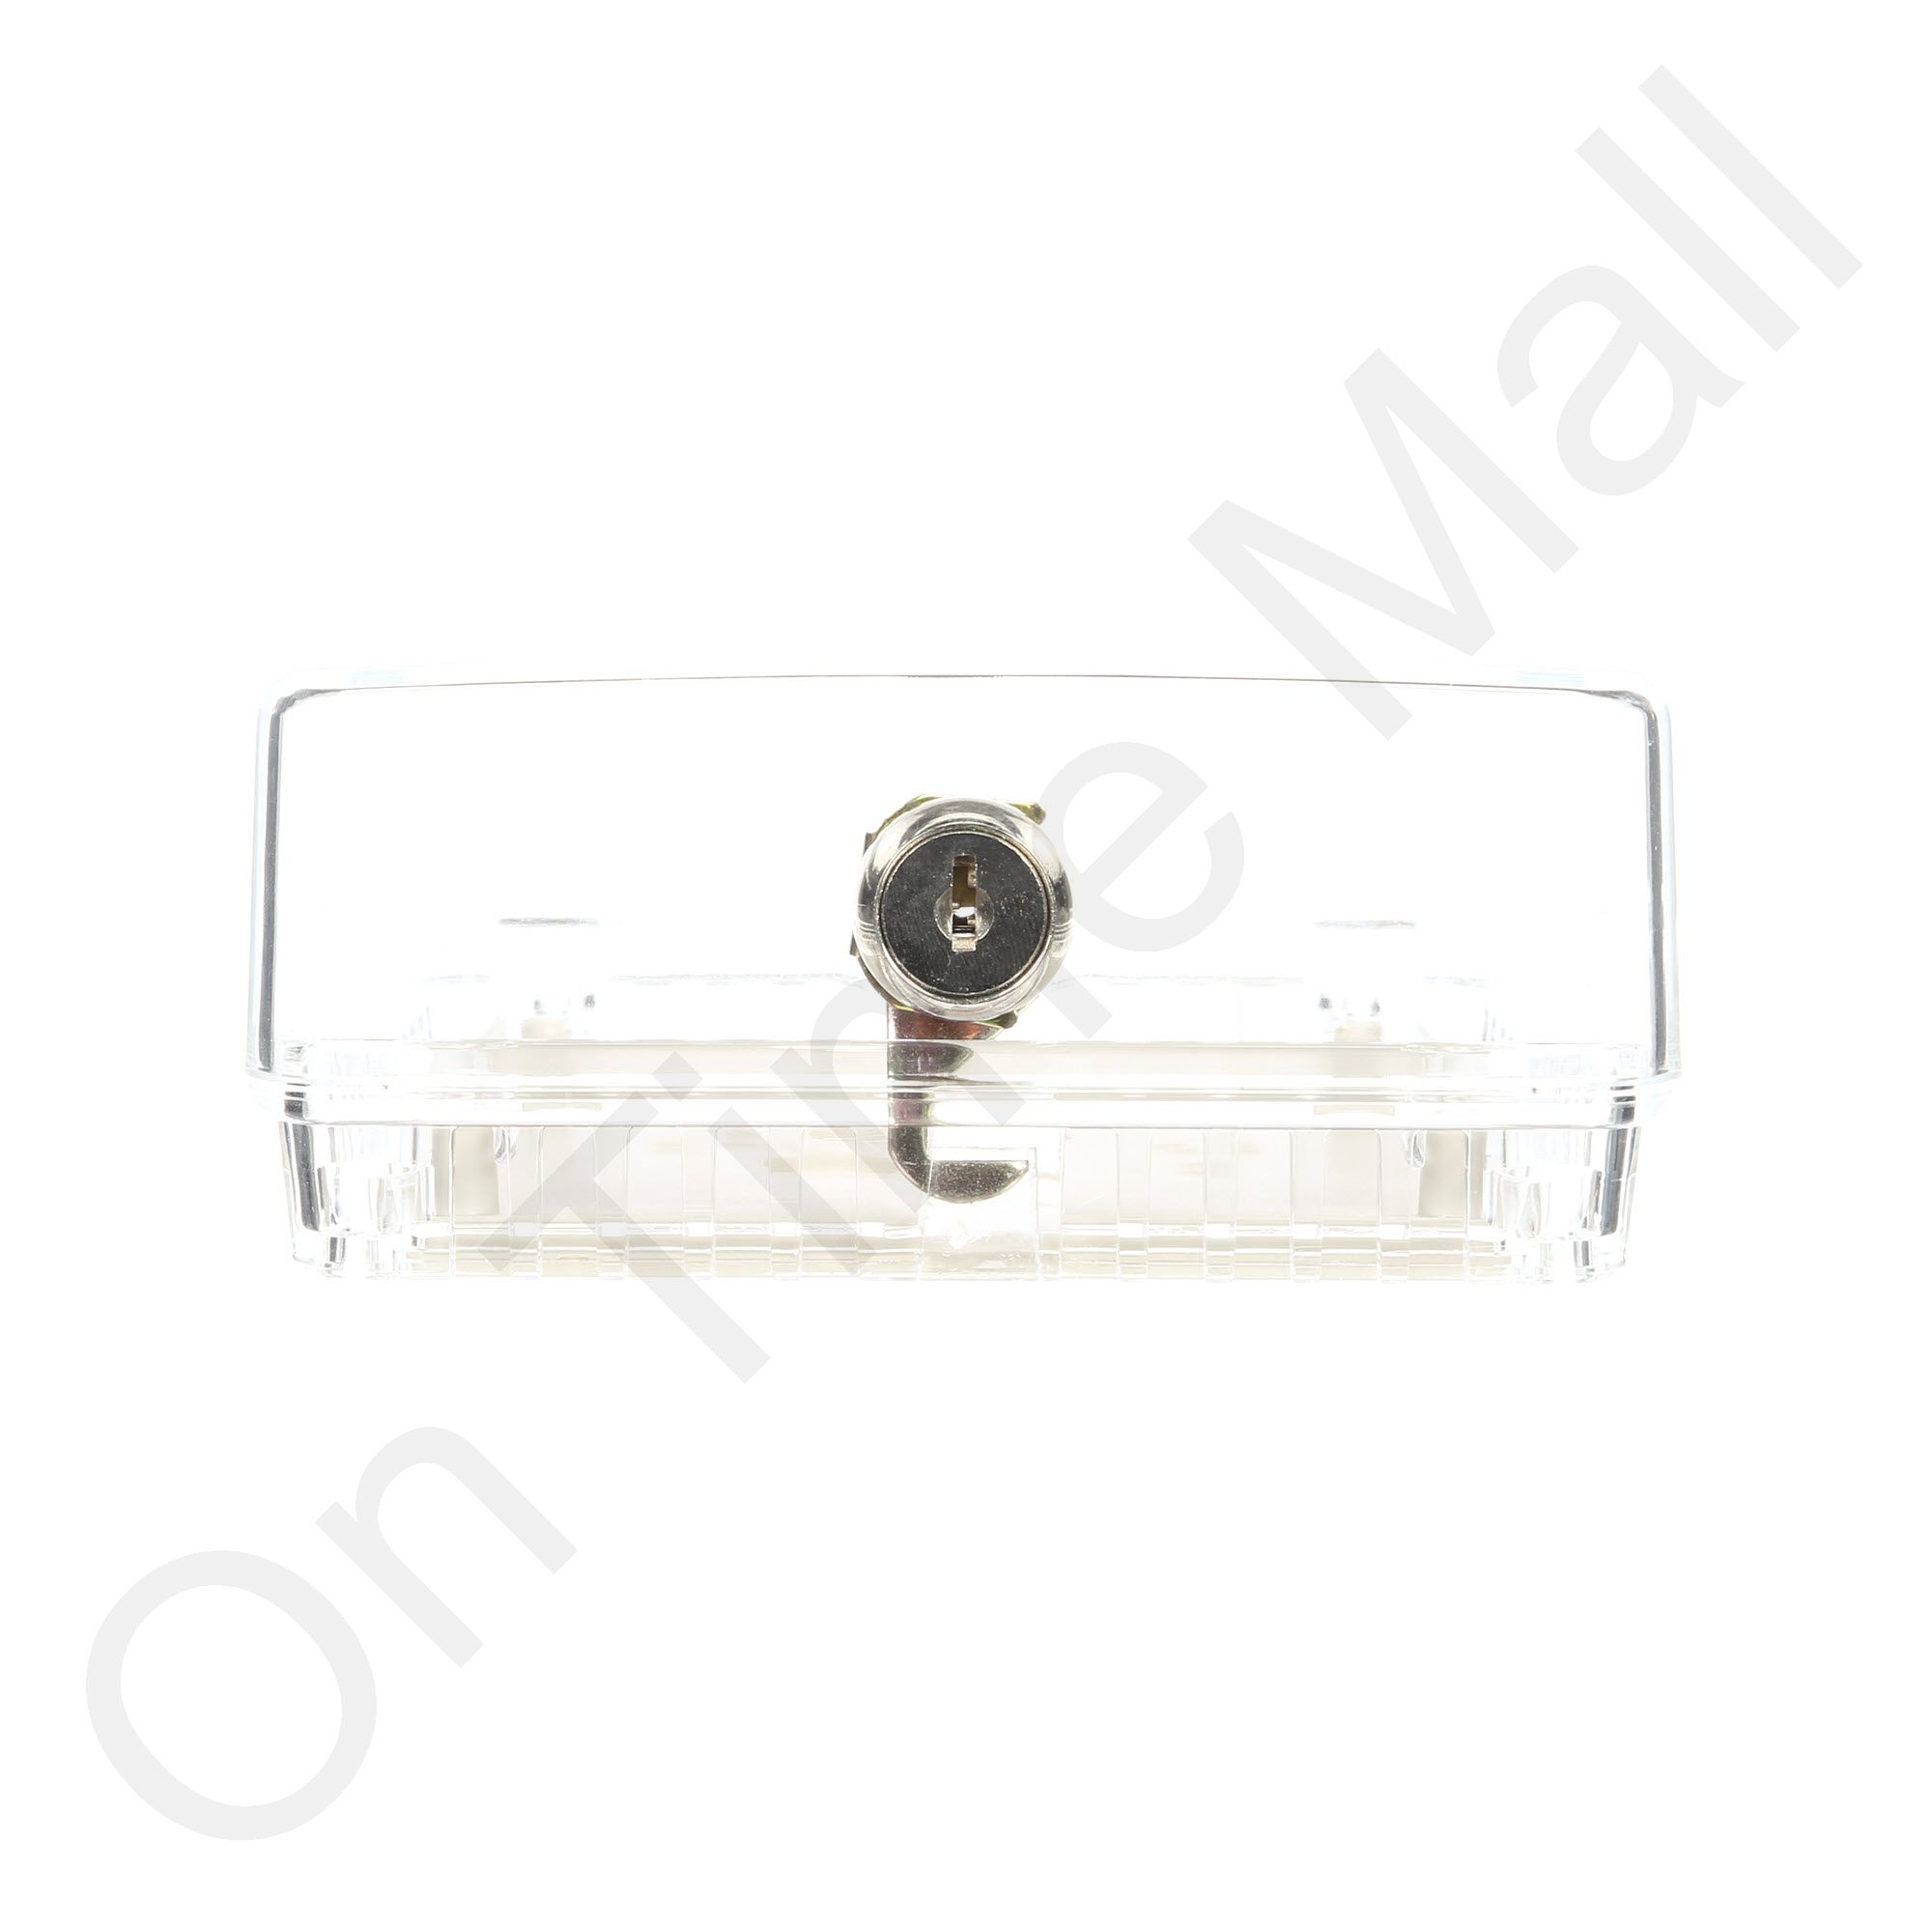 TG510A1001 - Thermostat Guard